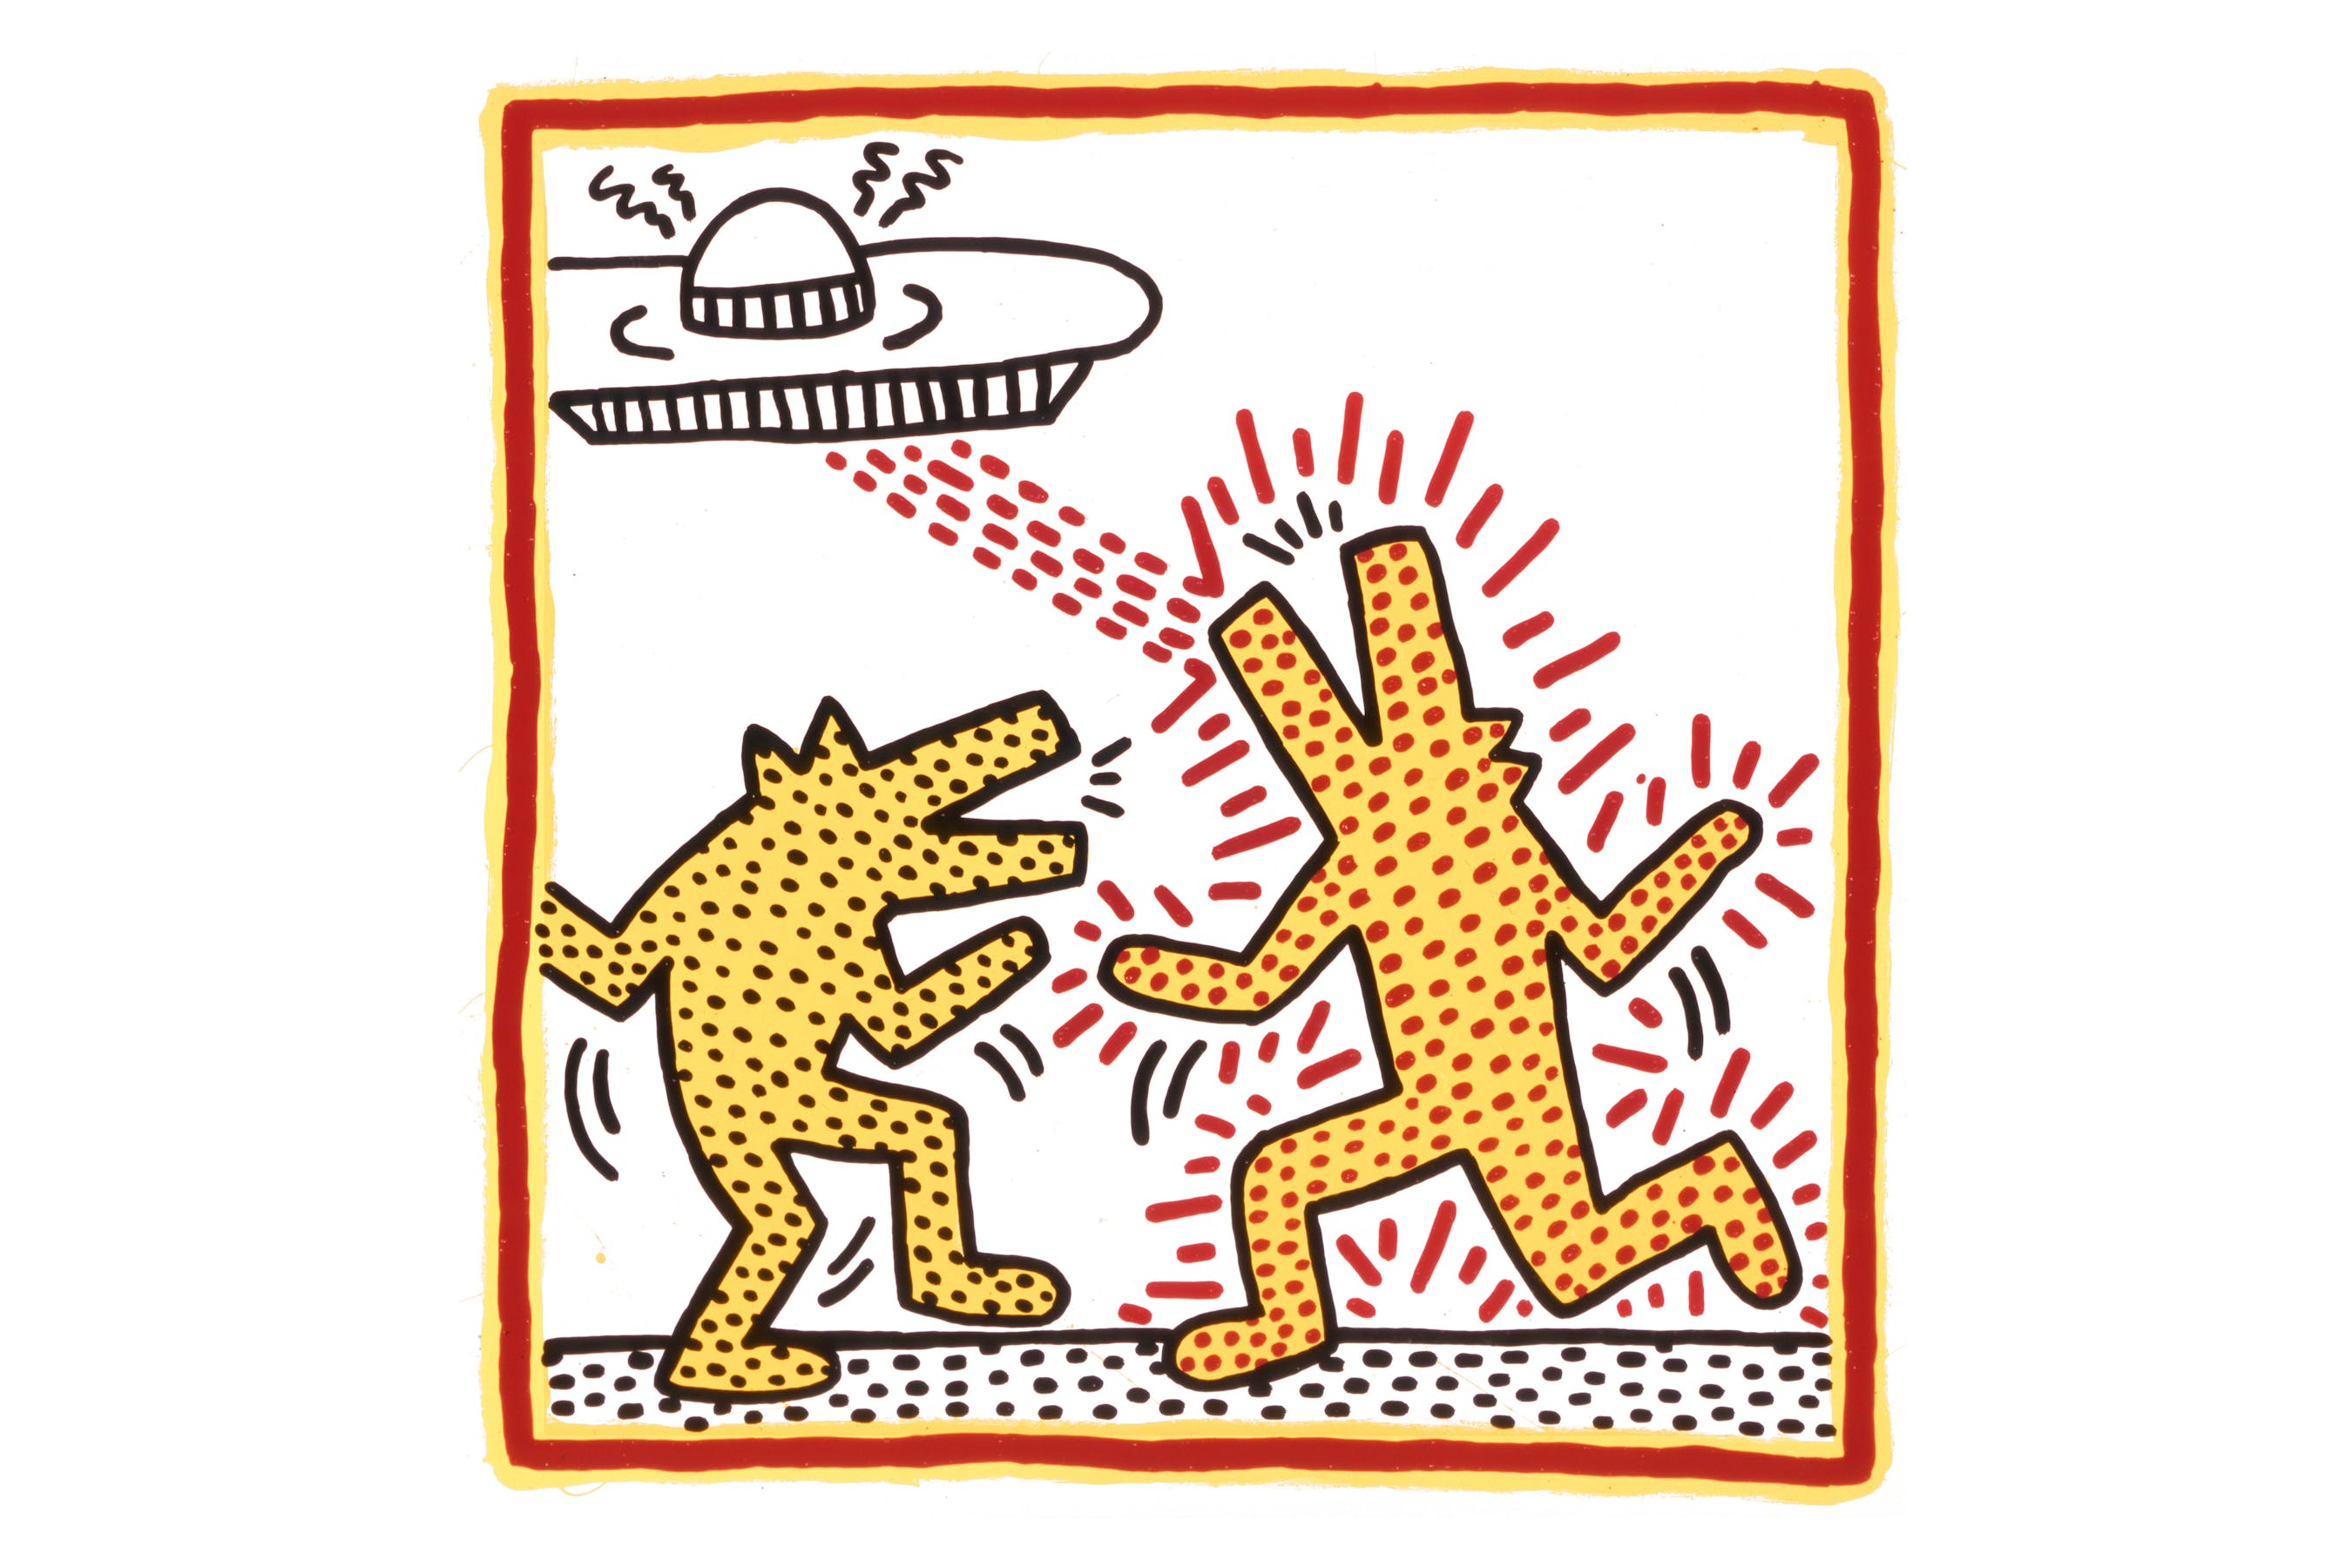 Cartoon-like drawing of two figures with wolf heads moving while one of them is zapped by beams coming out of a UFO in the sky.